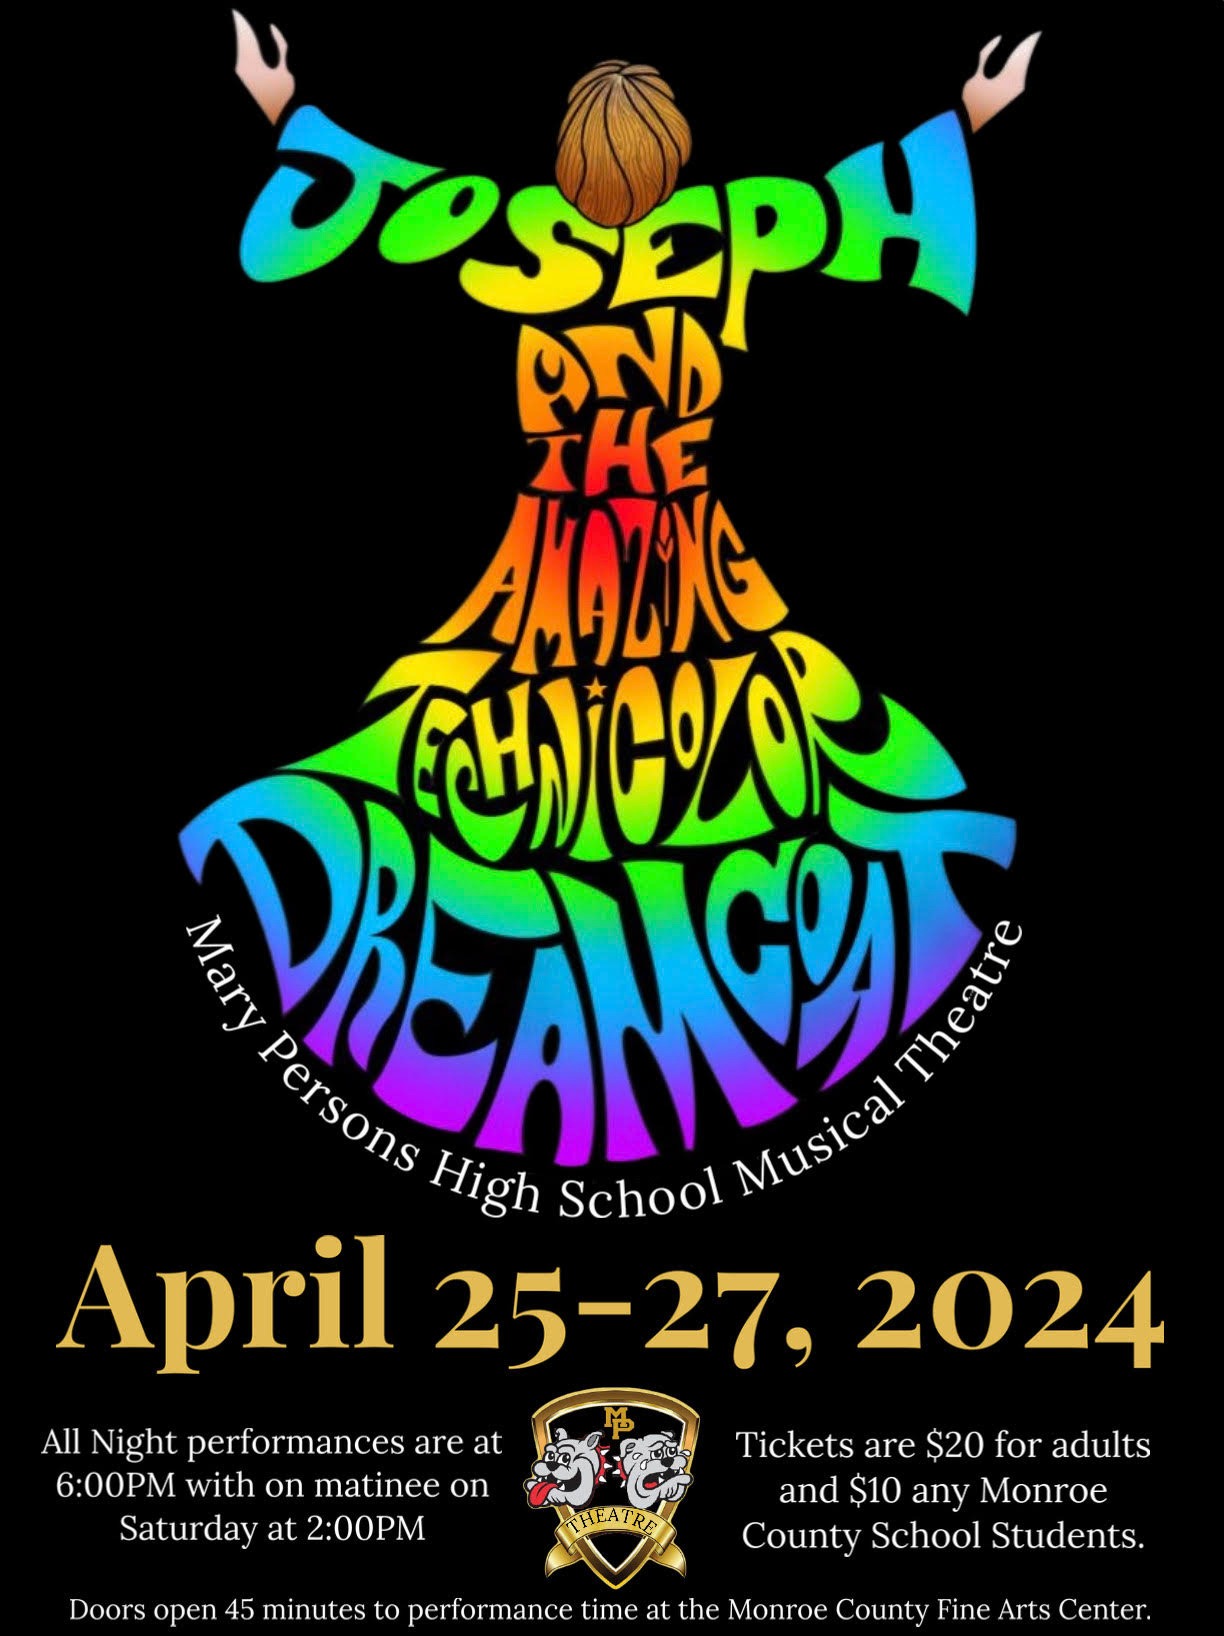 Mary Persons High School presents "Joseph and the amazing Technicolor Dreamcoat"